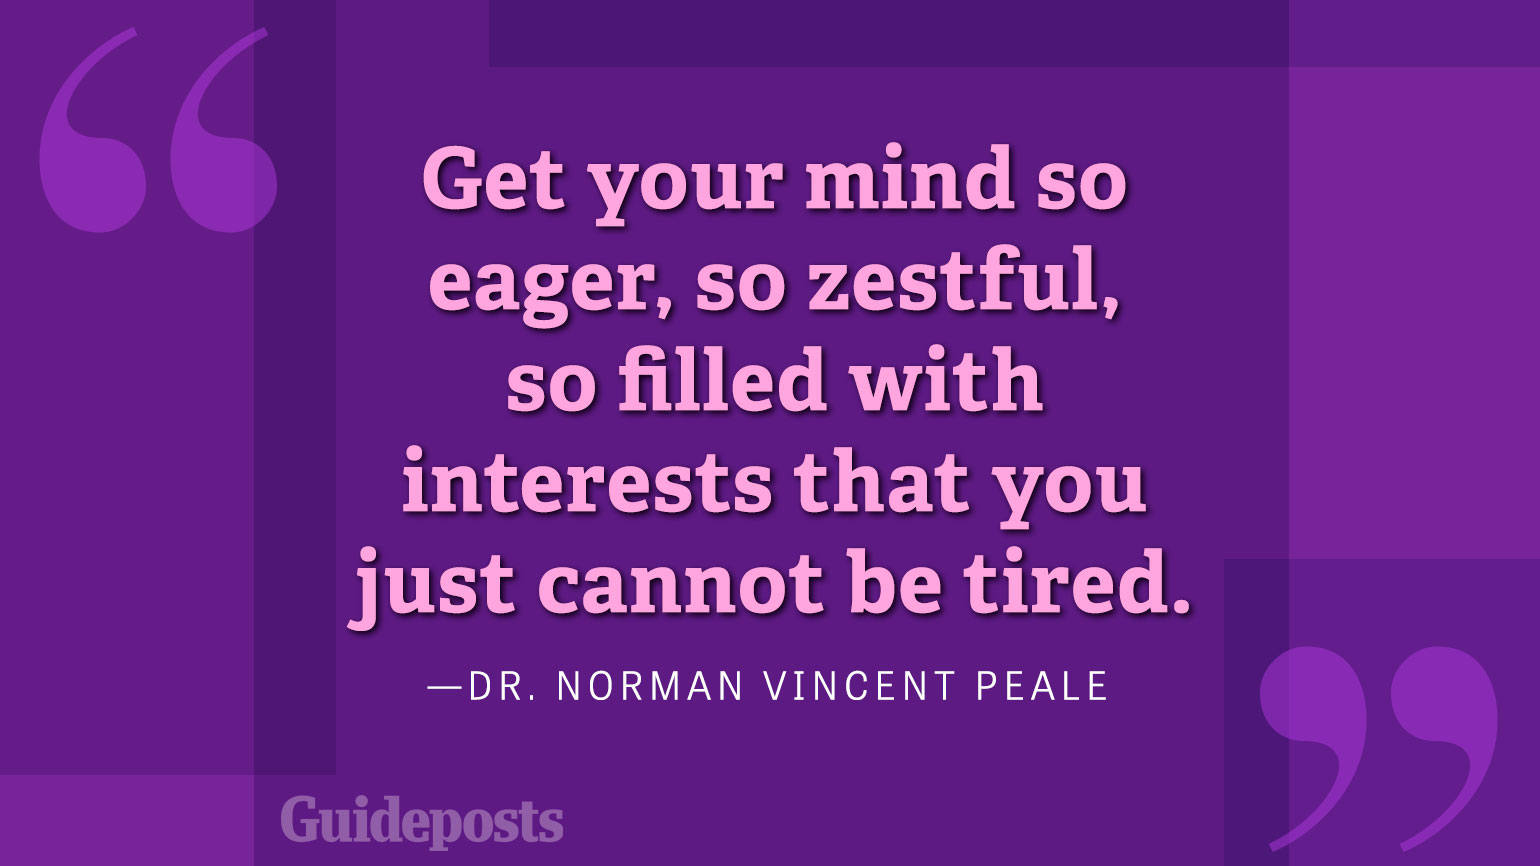 Get your mind so eager, so zestful, so filled with interests that you just cannot be tired.